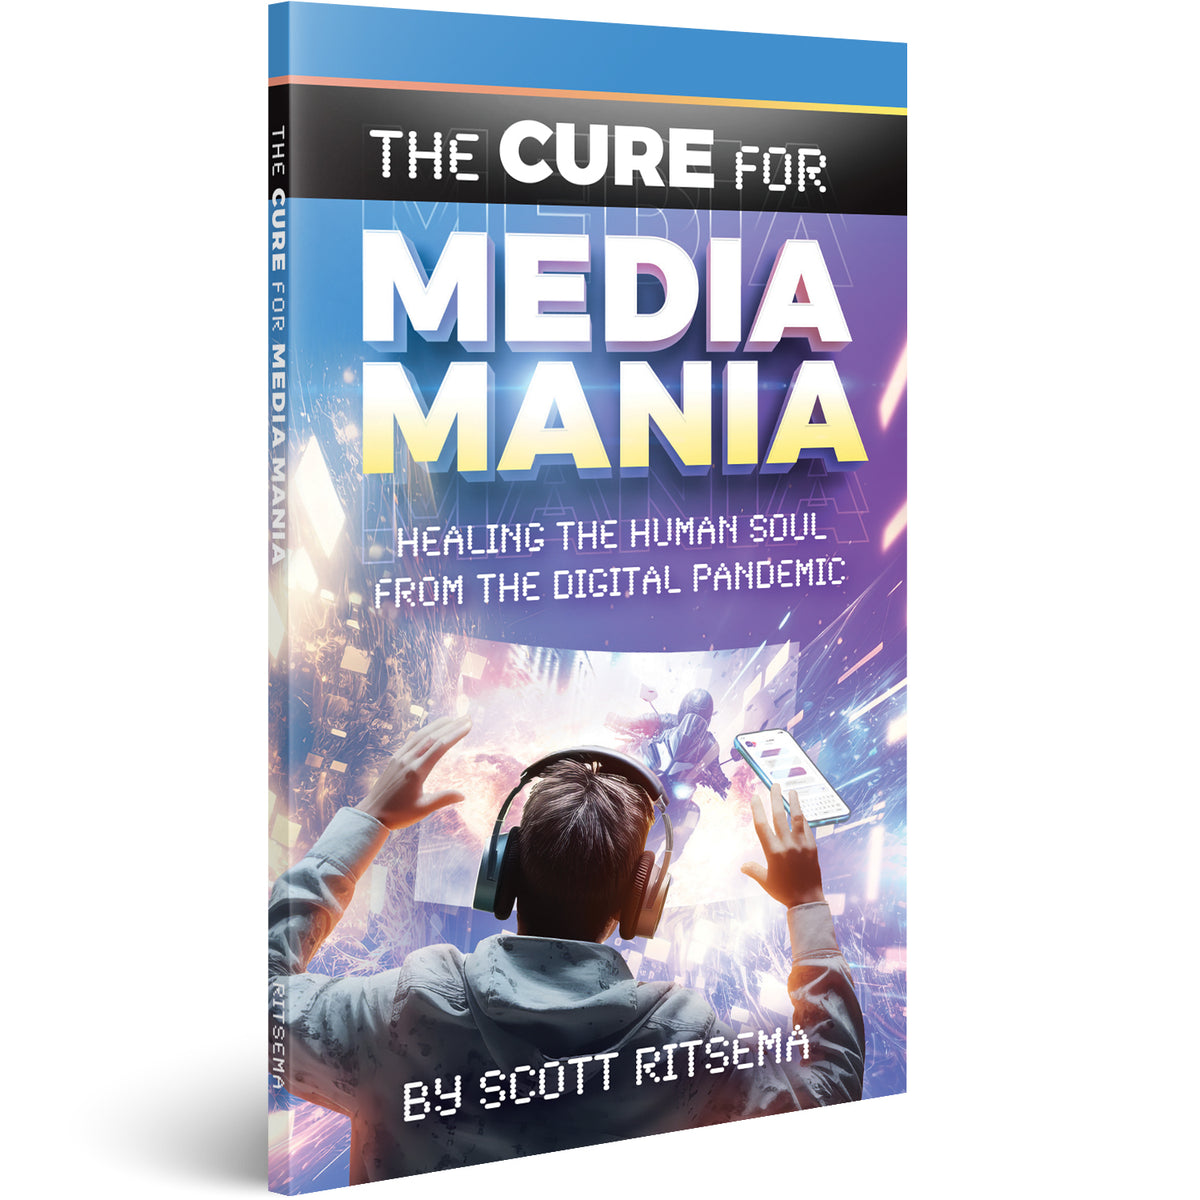 The Cure for Media Mania: Healing the Human Soul from the Digital Pandemic by Scott Ritsema